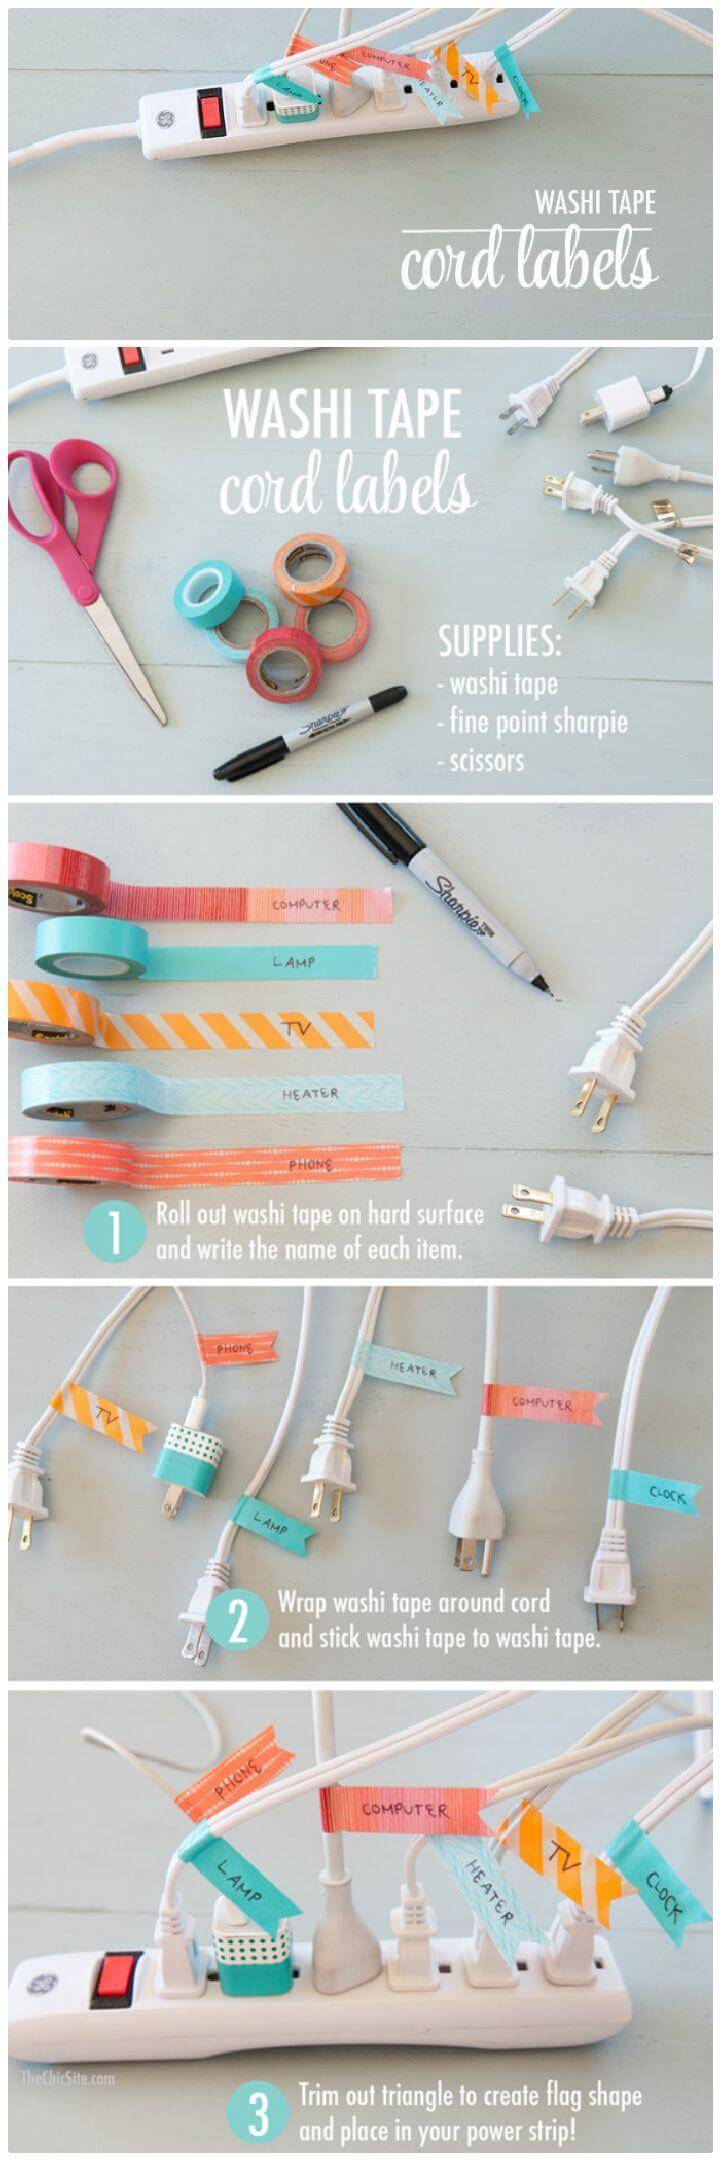 DIY Washi Tape Phone Chargers